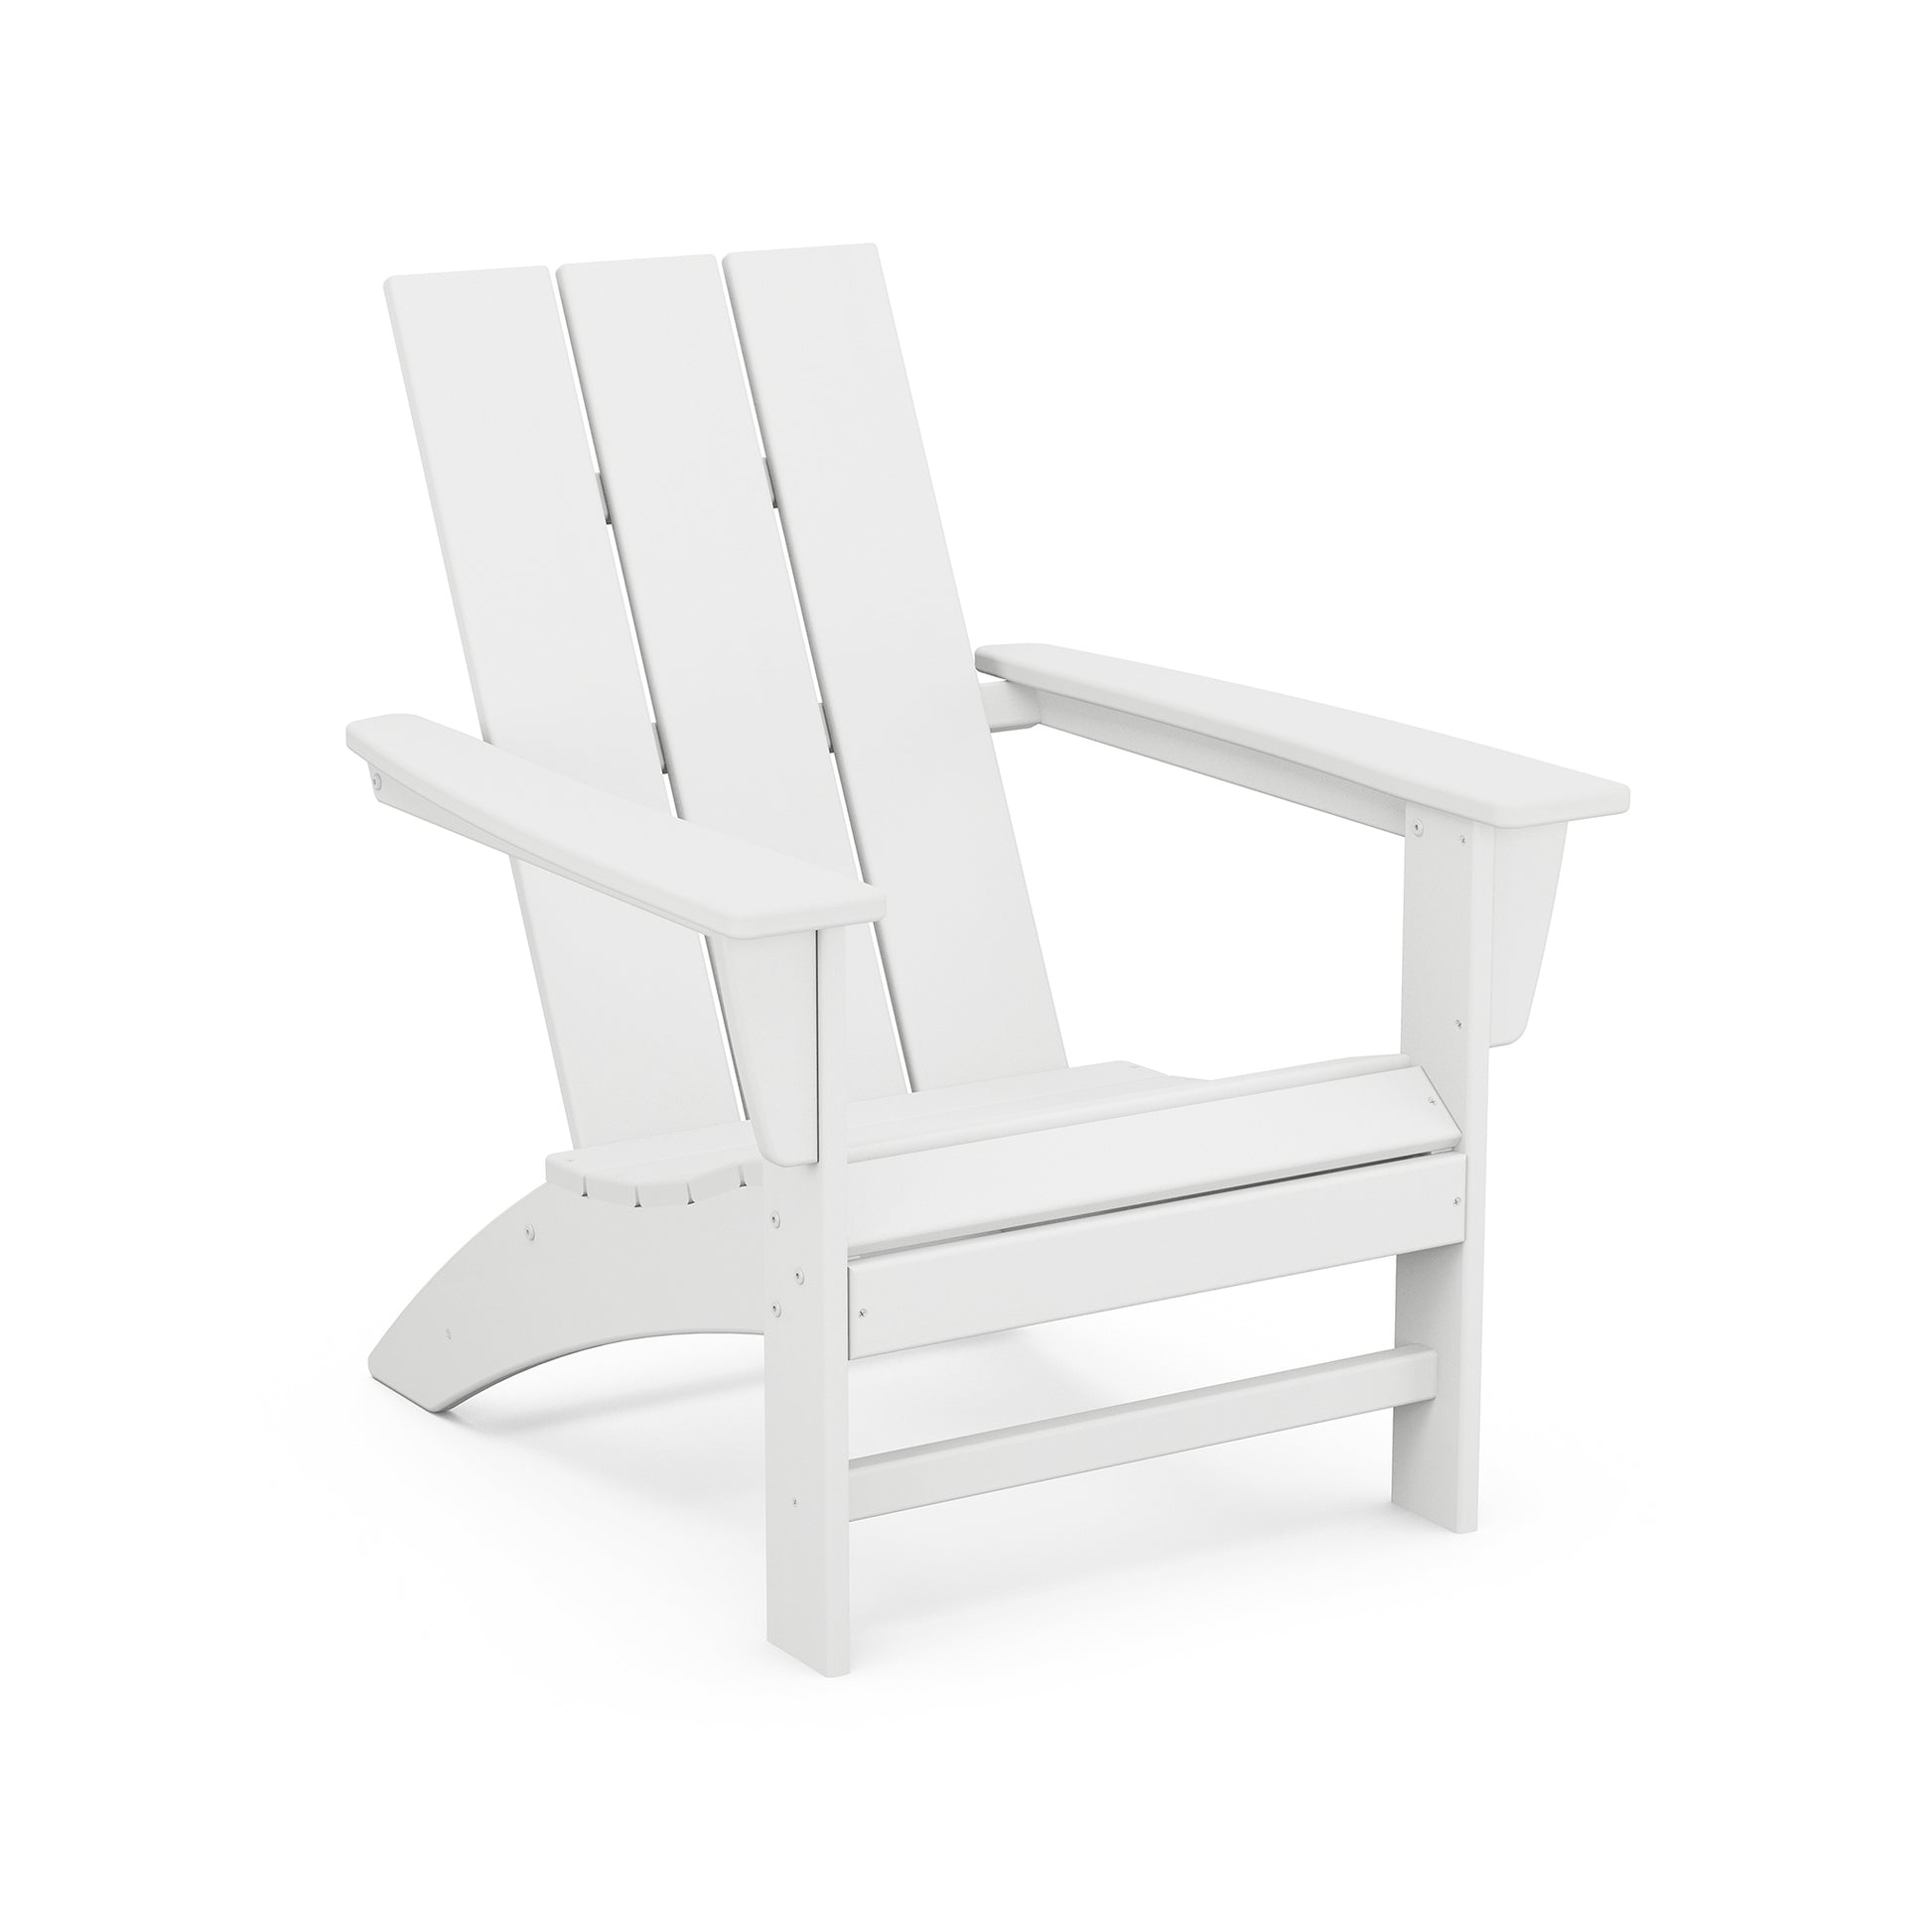 A white outdoor POLYWOOD Modern Adirondack chair featuring a traditional slatted design with a high back and wide armrests, isolated on a white background.